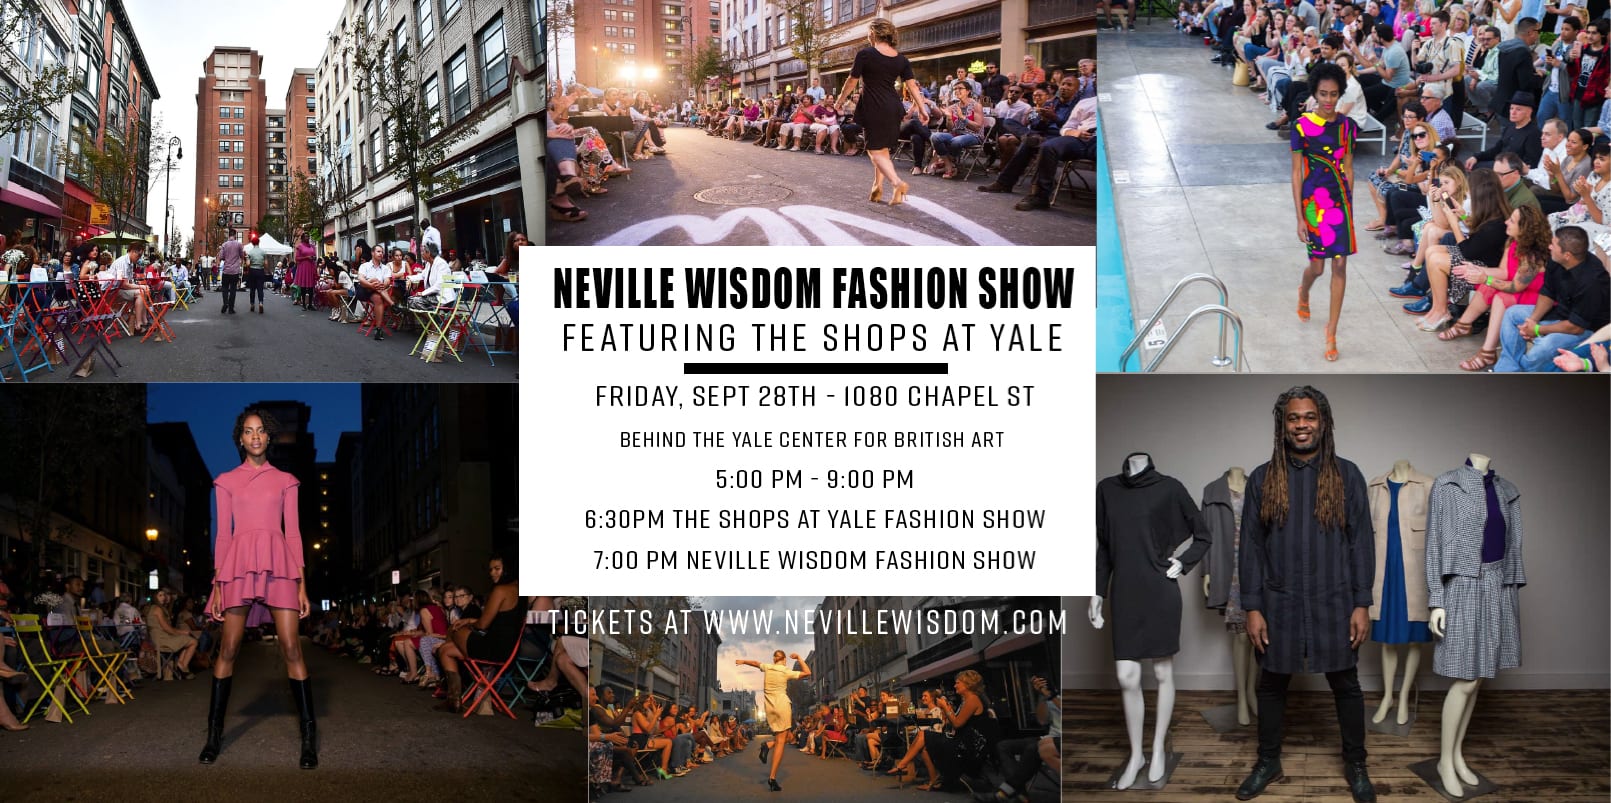 Neville Wisdm Fashion Show featuring The Shops at Yale